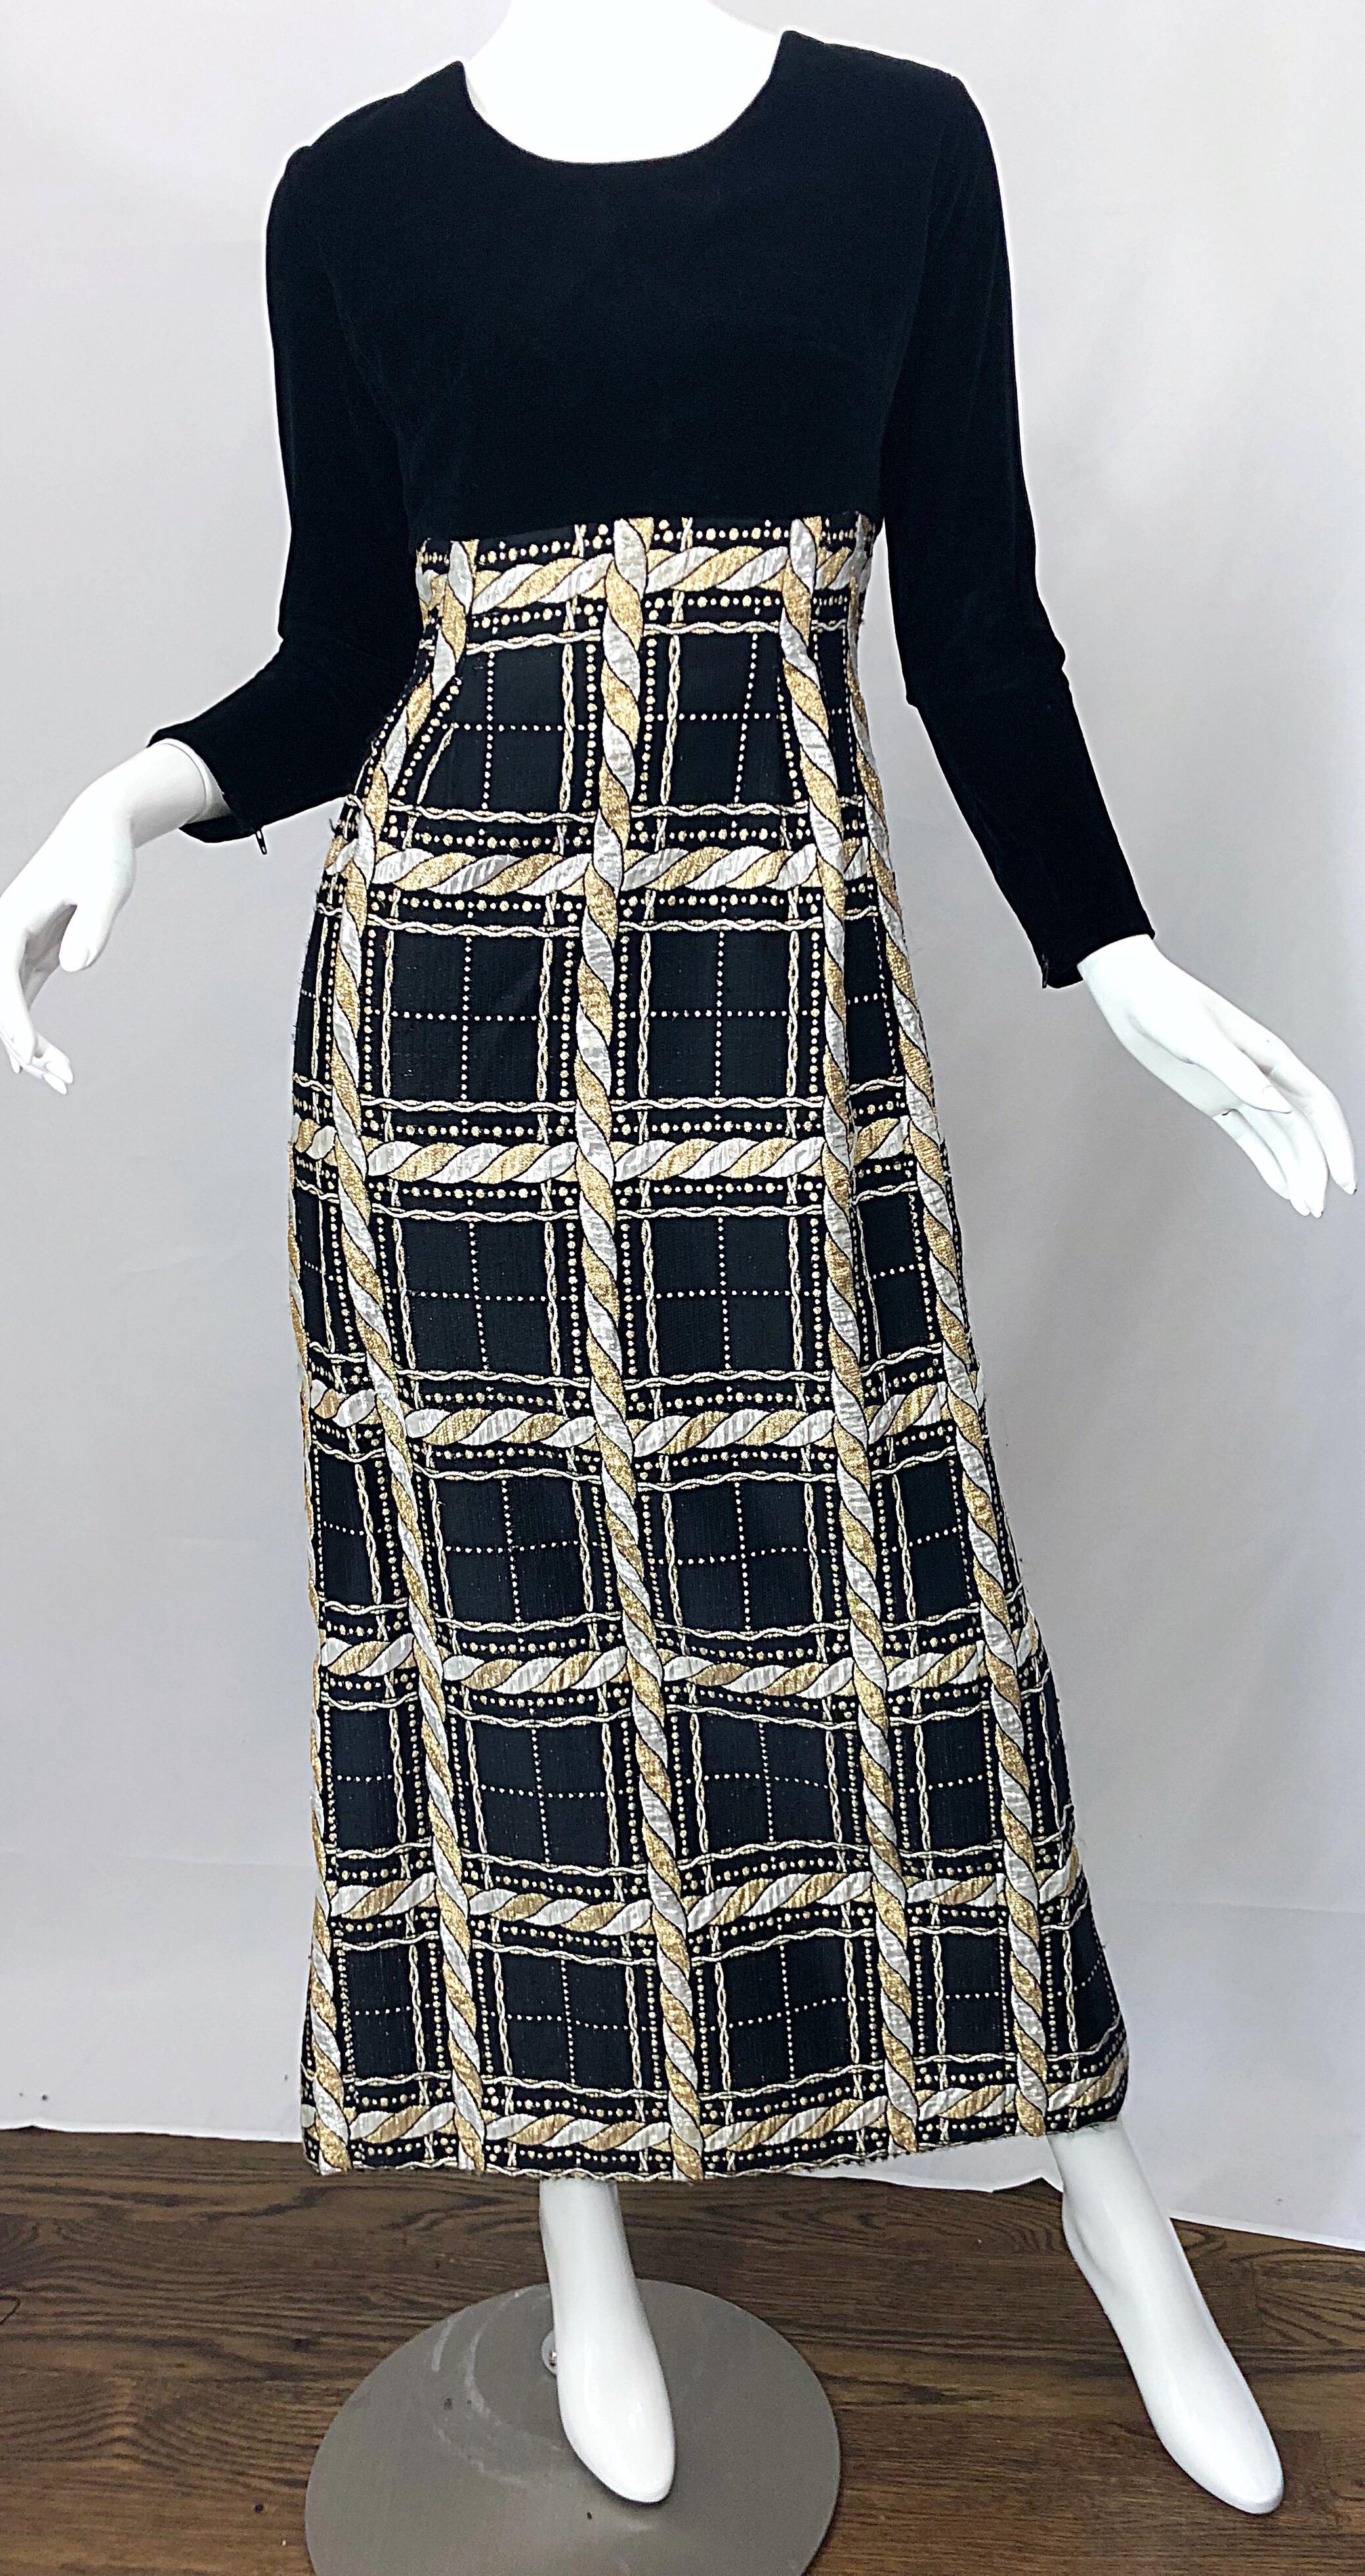 Incredible 1970s black, silver and gold velvet and lurex long sleeve metallic gown! Features a soft black rayon velvet tailored bodice with sleek long sleeves that feature a hidden zipper at each cuff. Regal plaid metallic lurex skirt features rope